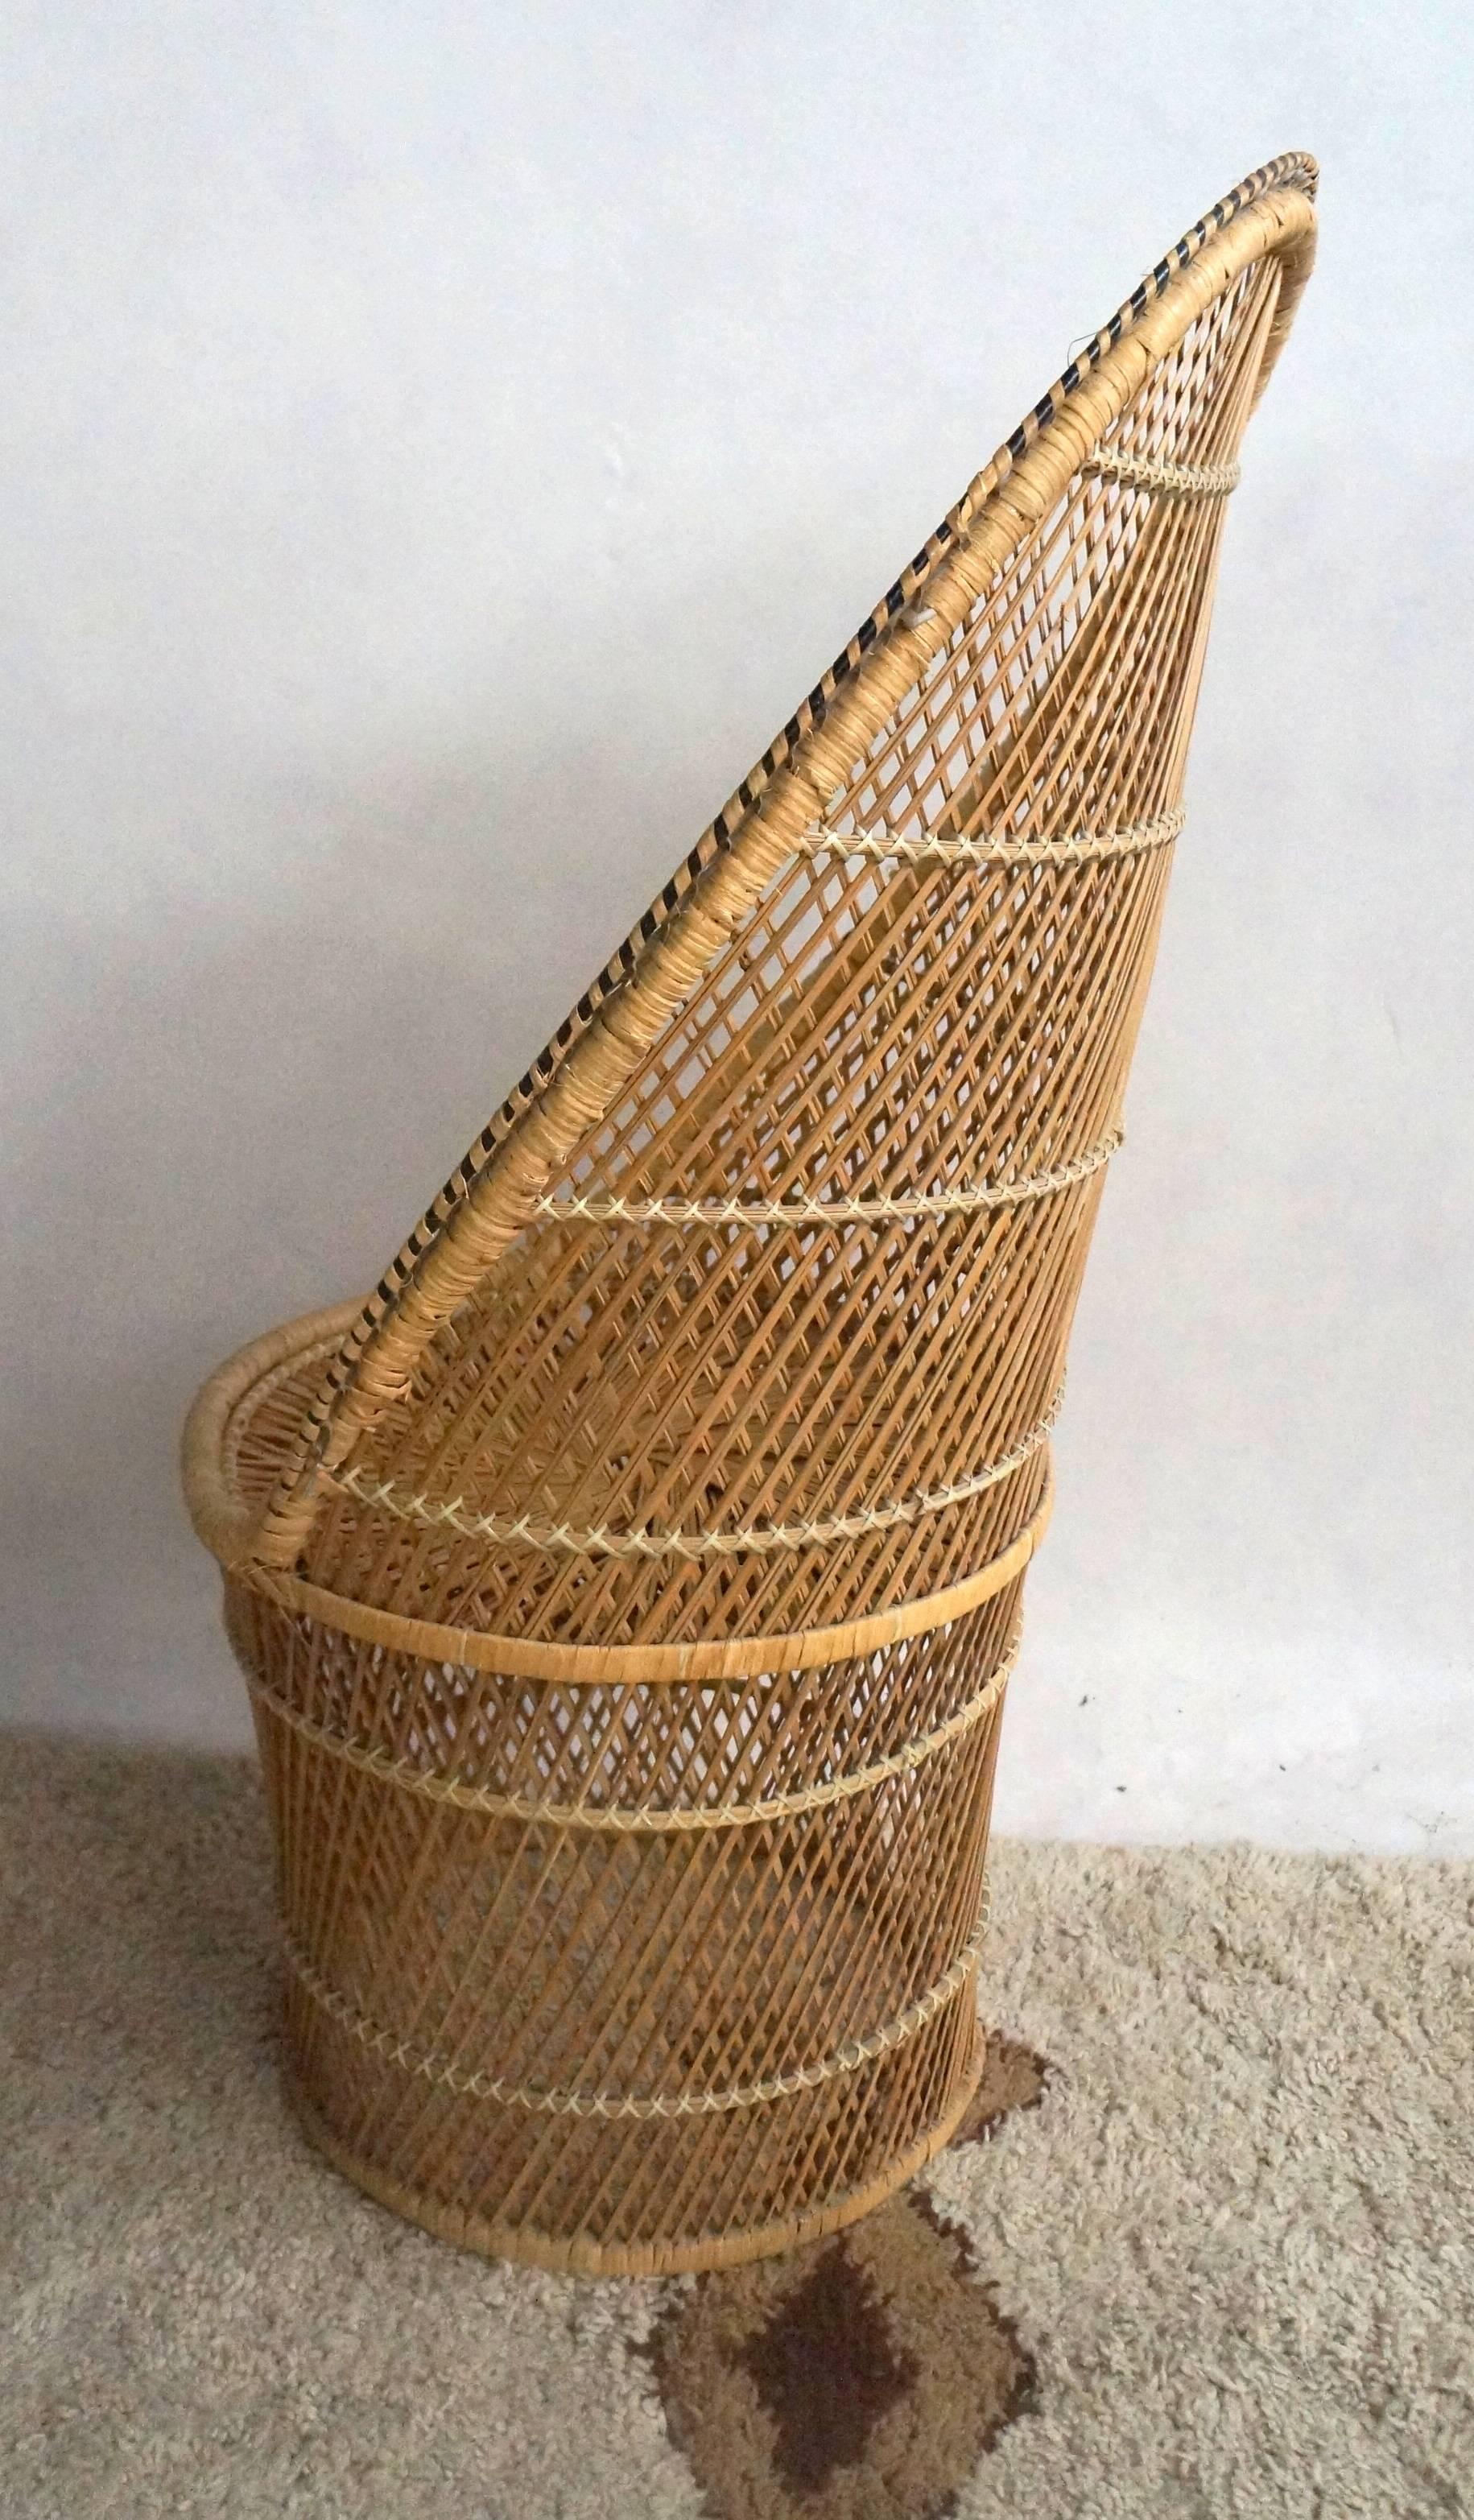 Rattan chair from the 1970s.
 